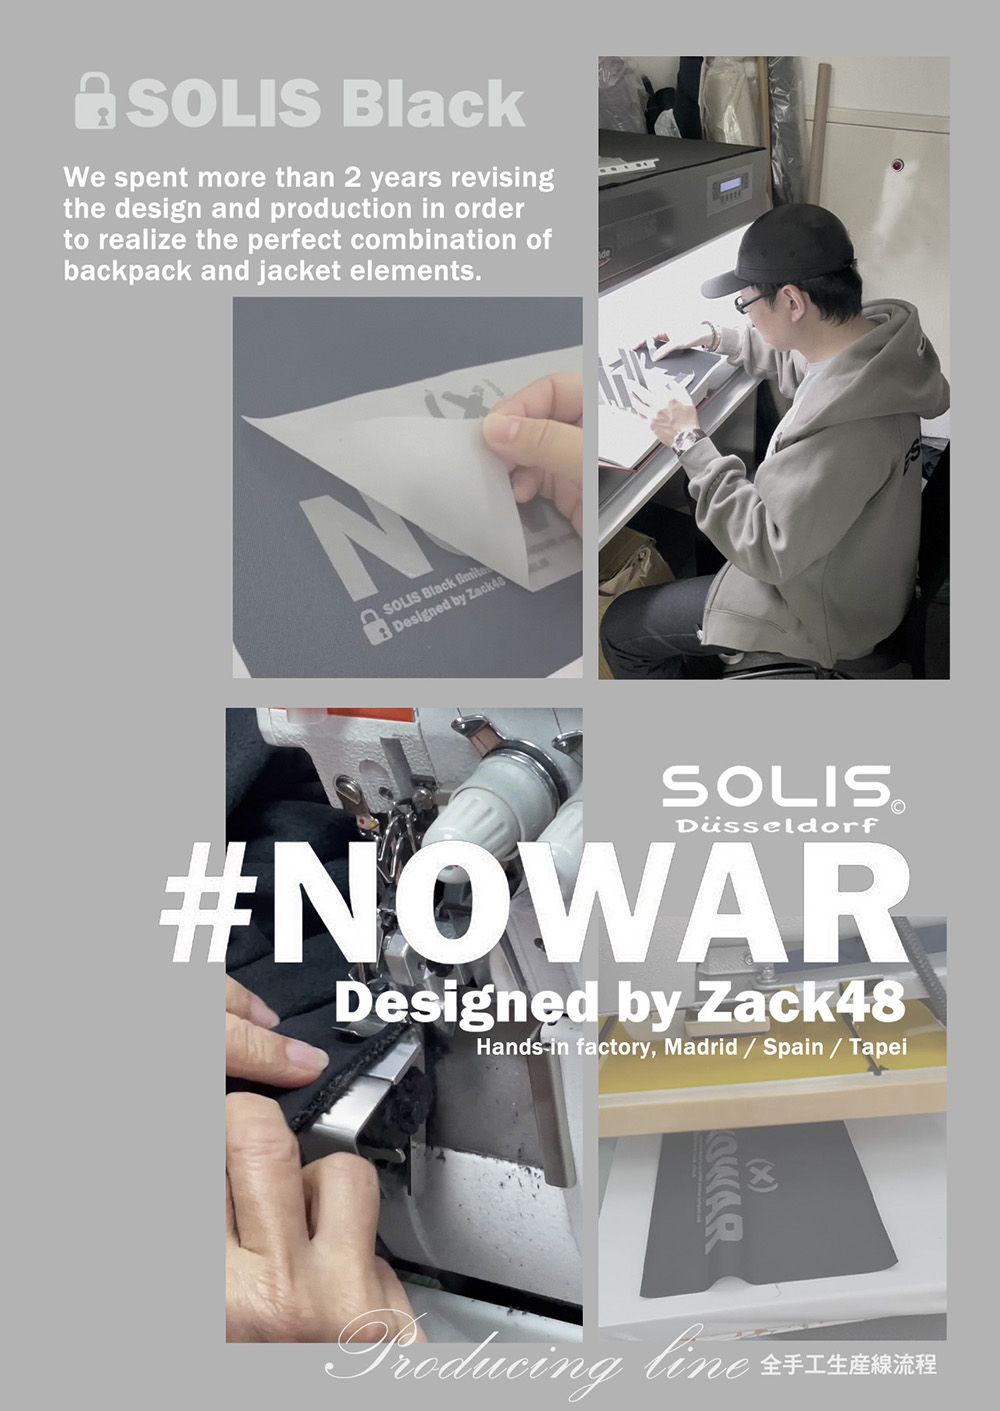 SOLIS We spent more than 2 years revisingthe design and production in orderto realize the perfect combination ofbackpack and jacket elements.SOLIS Black Designed by Zack48SOLISDüsseldorf#NOWARDesigned by Zack48Hands in factory, Madrid  Spain / TapeiProducing line 全手工生産線流程